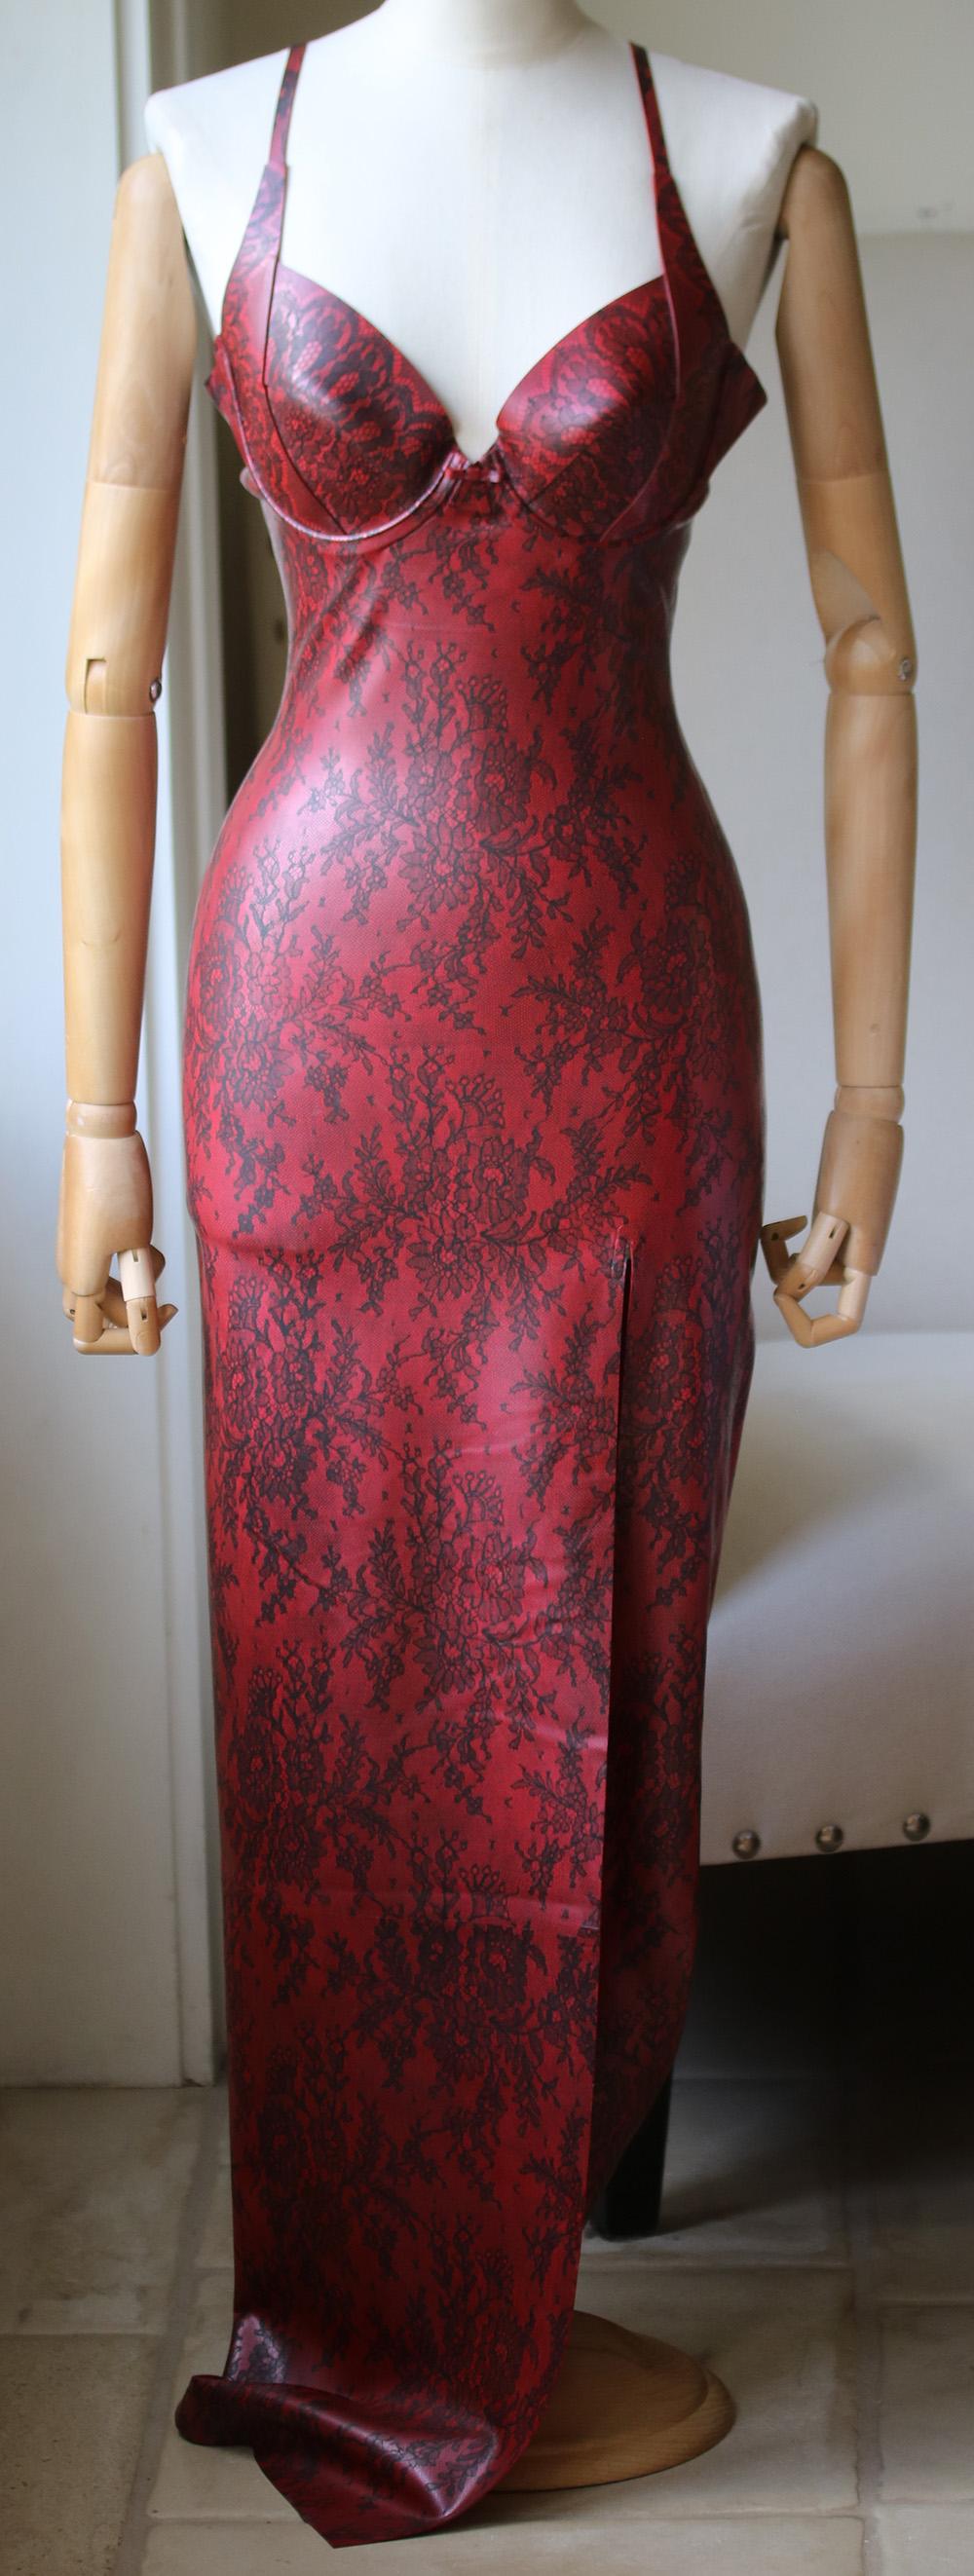 Printed Lady P Long Evening Dress with Special Print Cups in Pearlsheen Red Lace. 100% Latex.

Size: XSmall (UK 6, US 2, FR 34, IT 38)

Dimensions: Approx. 

Bust: 79 - 84 cm

Underbust: 65 - 70 cm 

Waist: 58.5 - 63.5 cm 

Buttocks: 84 - 89 cm